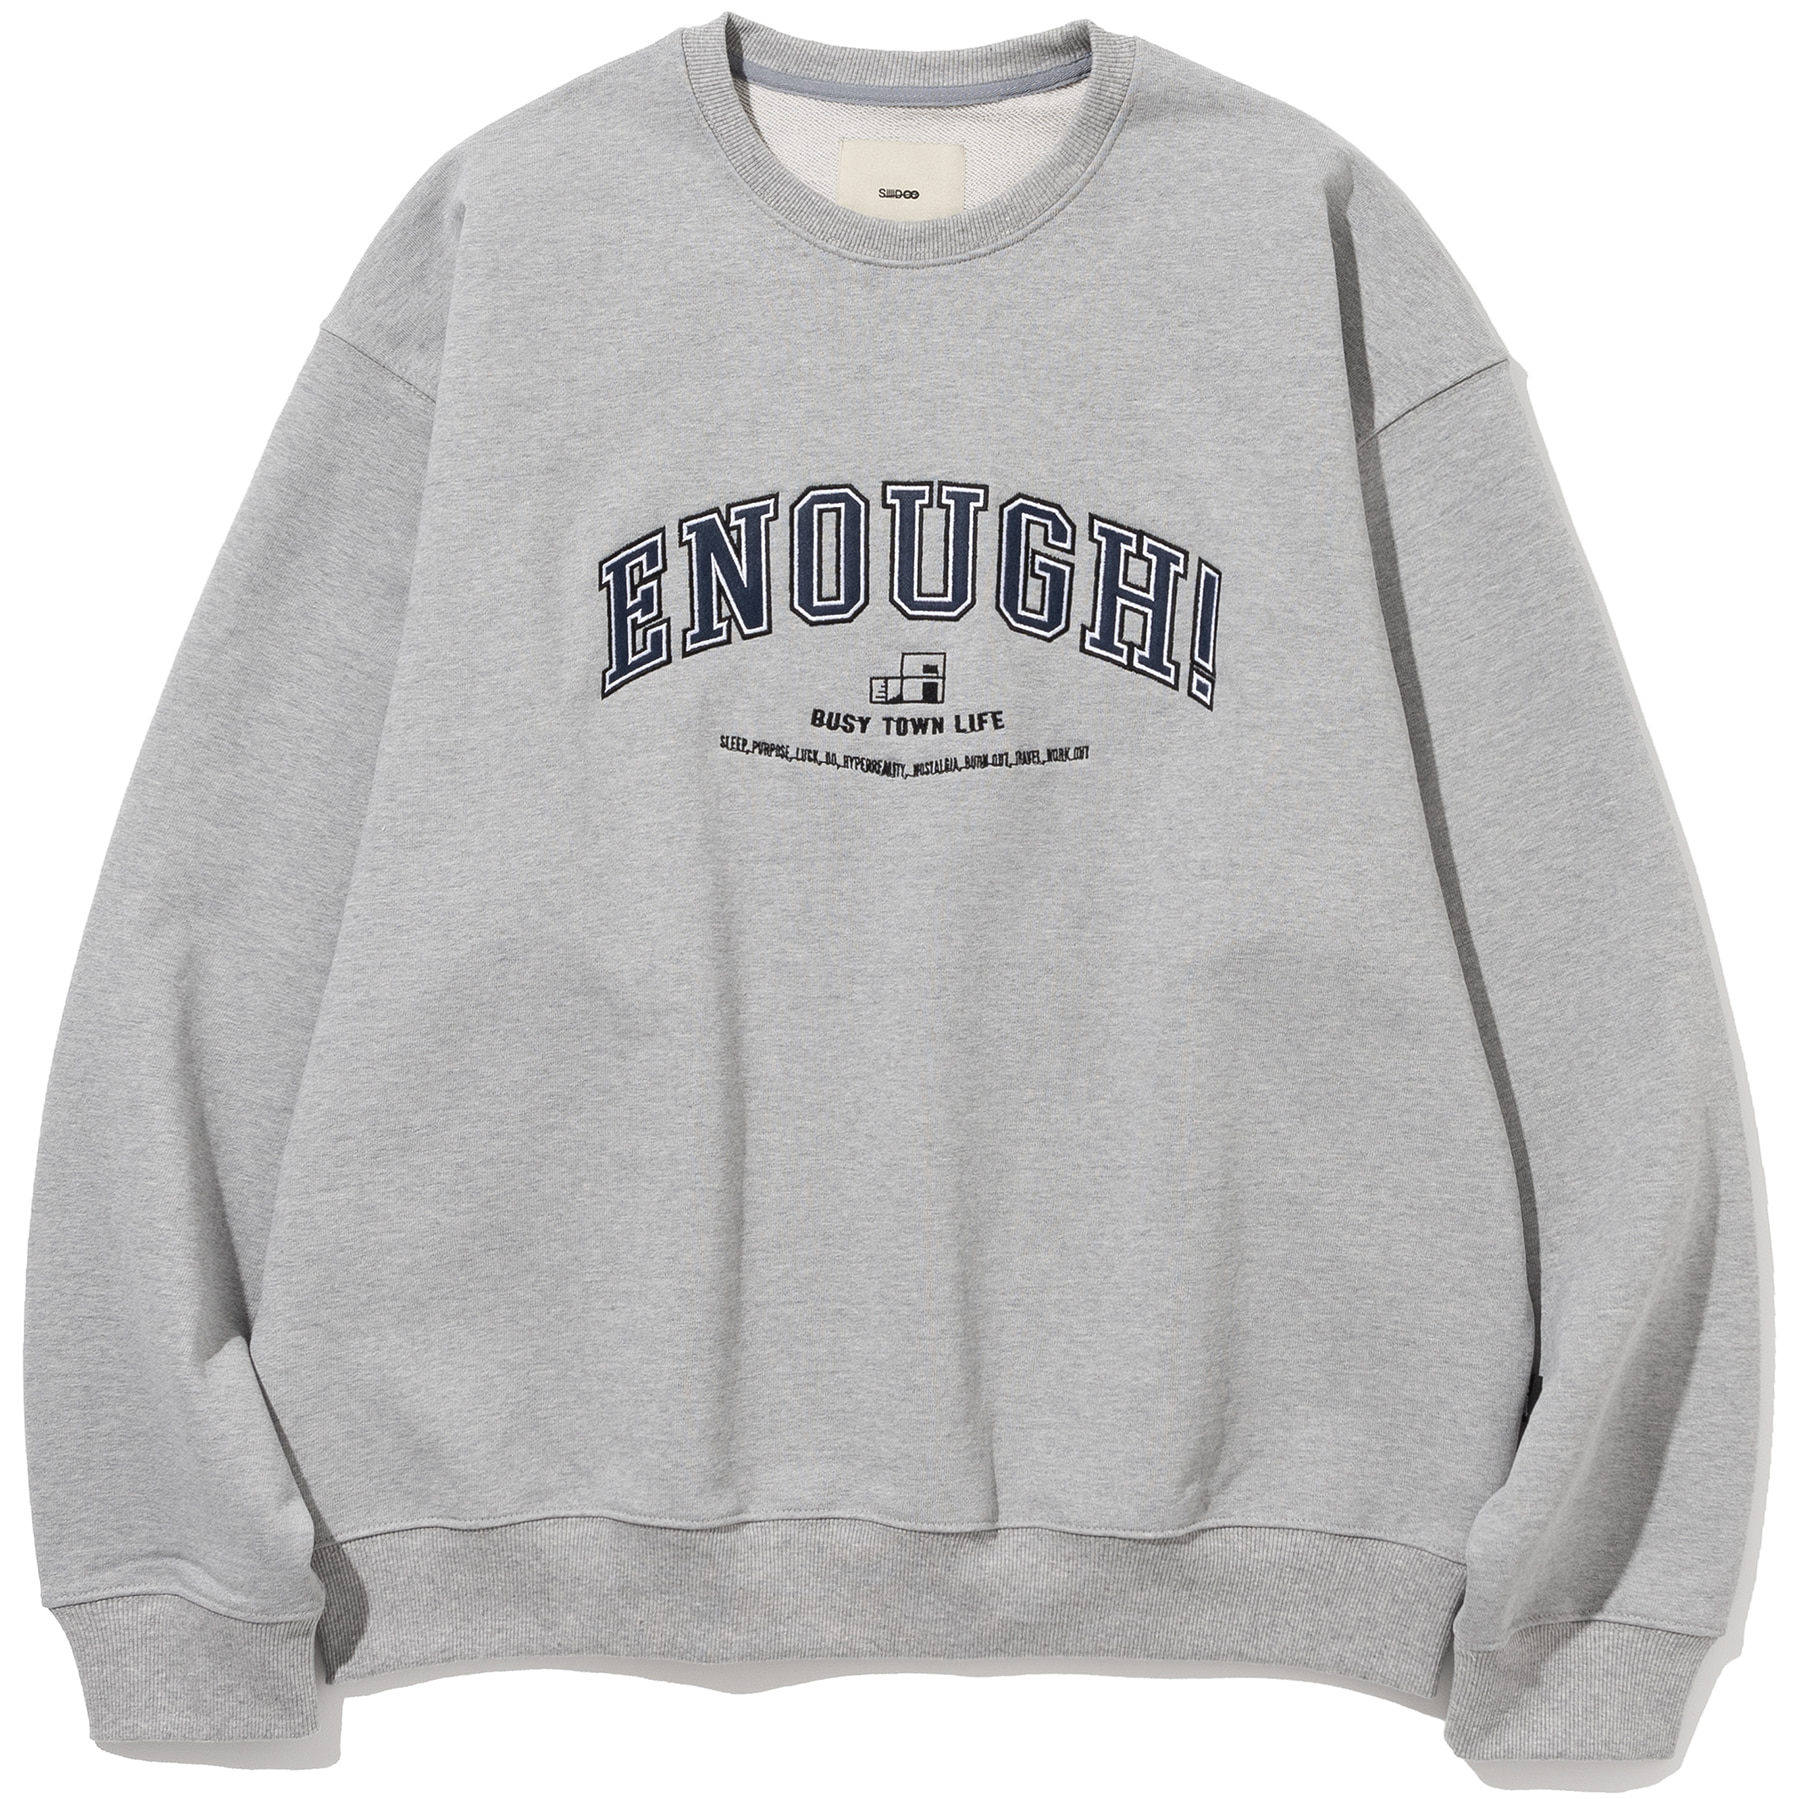 &#039;ENOUGH! BUSY TOWN LIFE&#039; VINTAGE SWEAT SHIRT #2(1st restock)